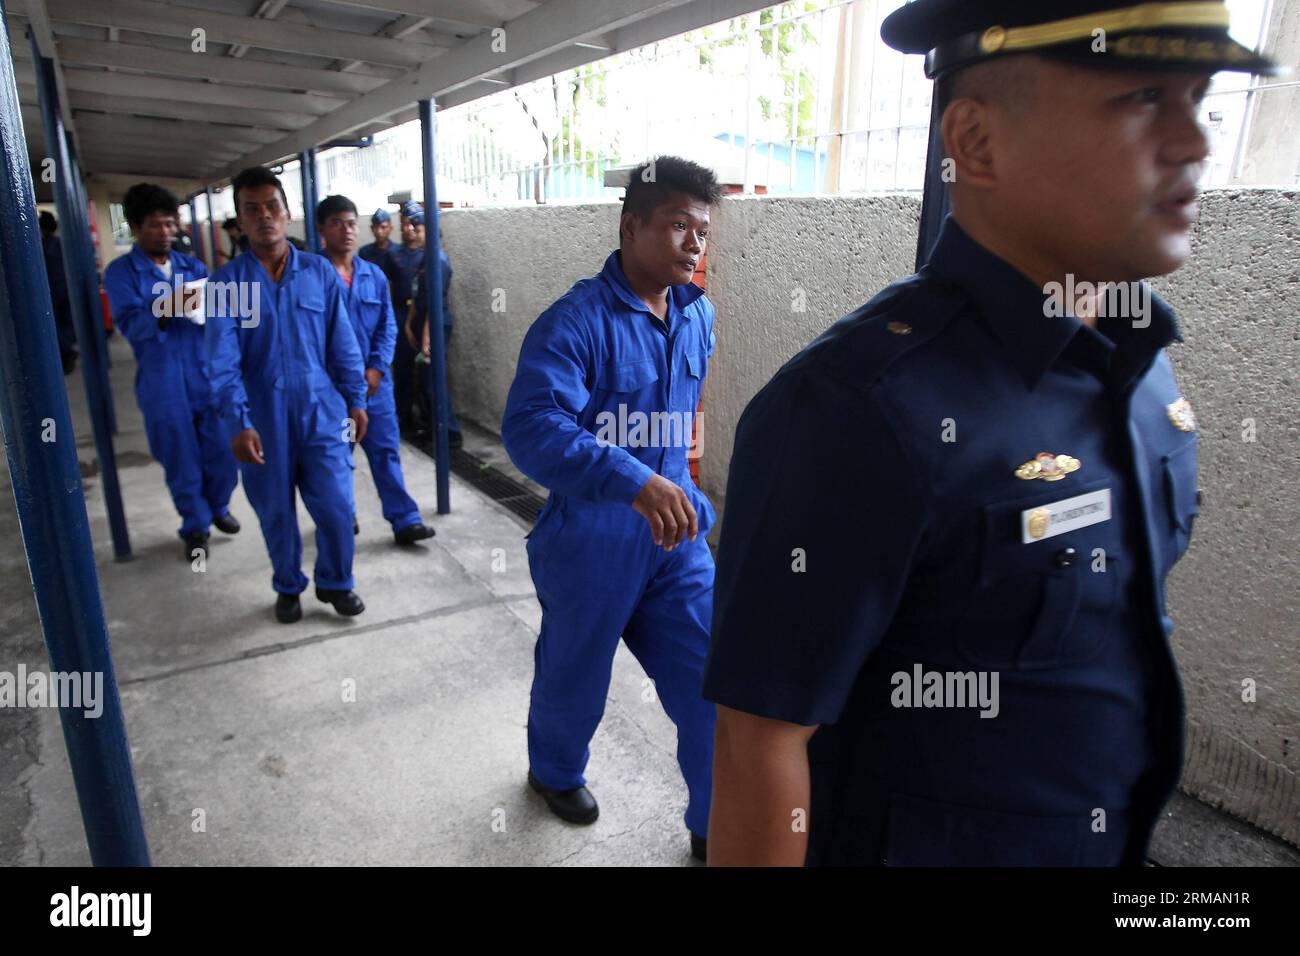 (140717) -- MANILA, July 17, 2014 (Xinhua) -- A member of the Philippine Coast Guard (PCG) leads the four rescued Filipino fishermen inside the PCG Headquarters in Manila, the Philippines, on July 17, 2014. The crew of Chinese vessel MV Pacific Pioneer, which came from Hong Kong of China, rescued the four Filipino fishermen who were in the sea for two days after their vessel was submerged in the strong wind brought by typhoon Rammasun. (Xinhua/Rouelle Umali) PHILIPPINES-MANILA-RESCUED FISHERMEN PUBLICATIONxNOTxINxCHN   Manila July 17 2014 XINHUA a member of The Philippine Coast Guard PCG leads Stockfoto